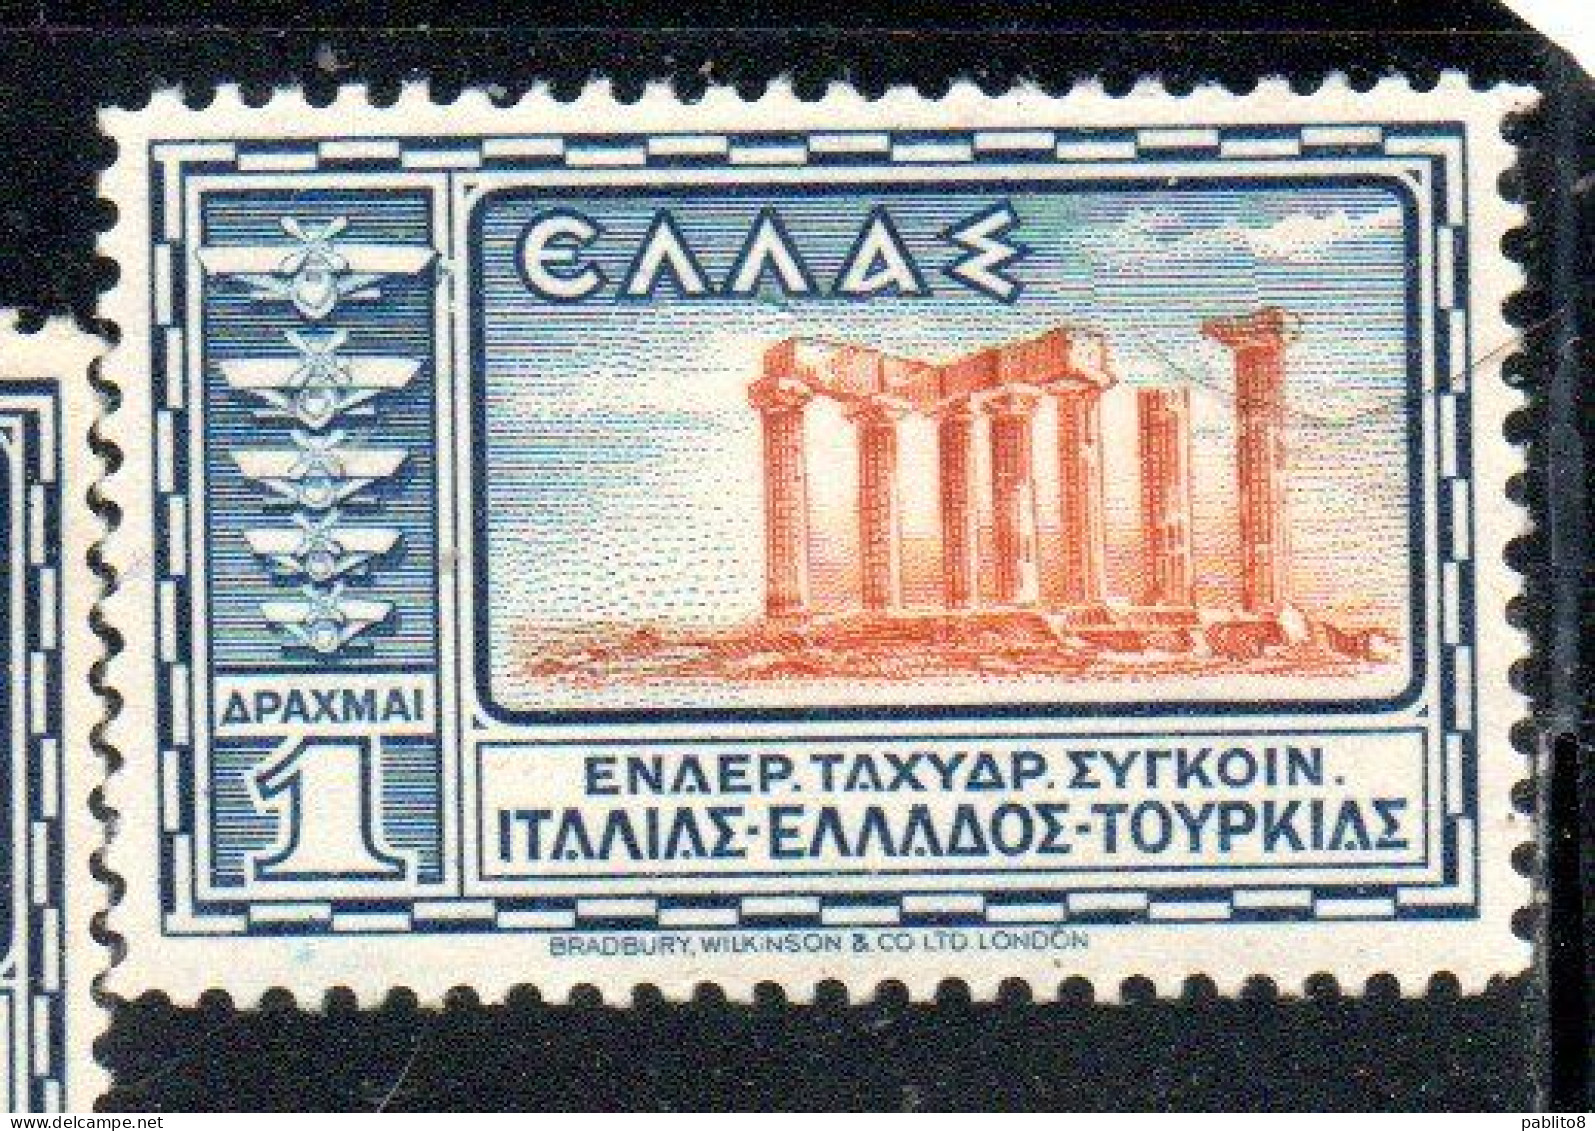 GREECE GRECIA ELLAS 1933 AIR POST MAIL AIRMAIL TEMPLE OF APOLLO CORINTH 1d MNH - Unused Stamps